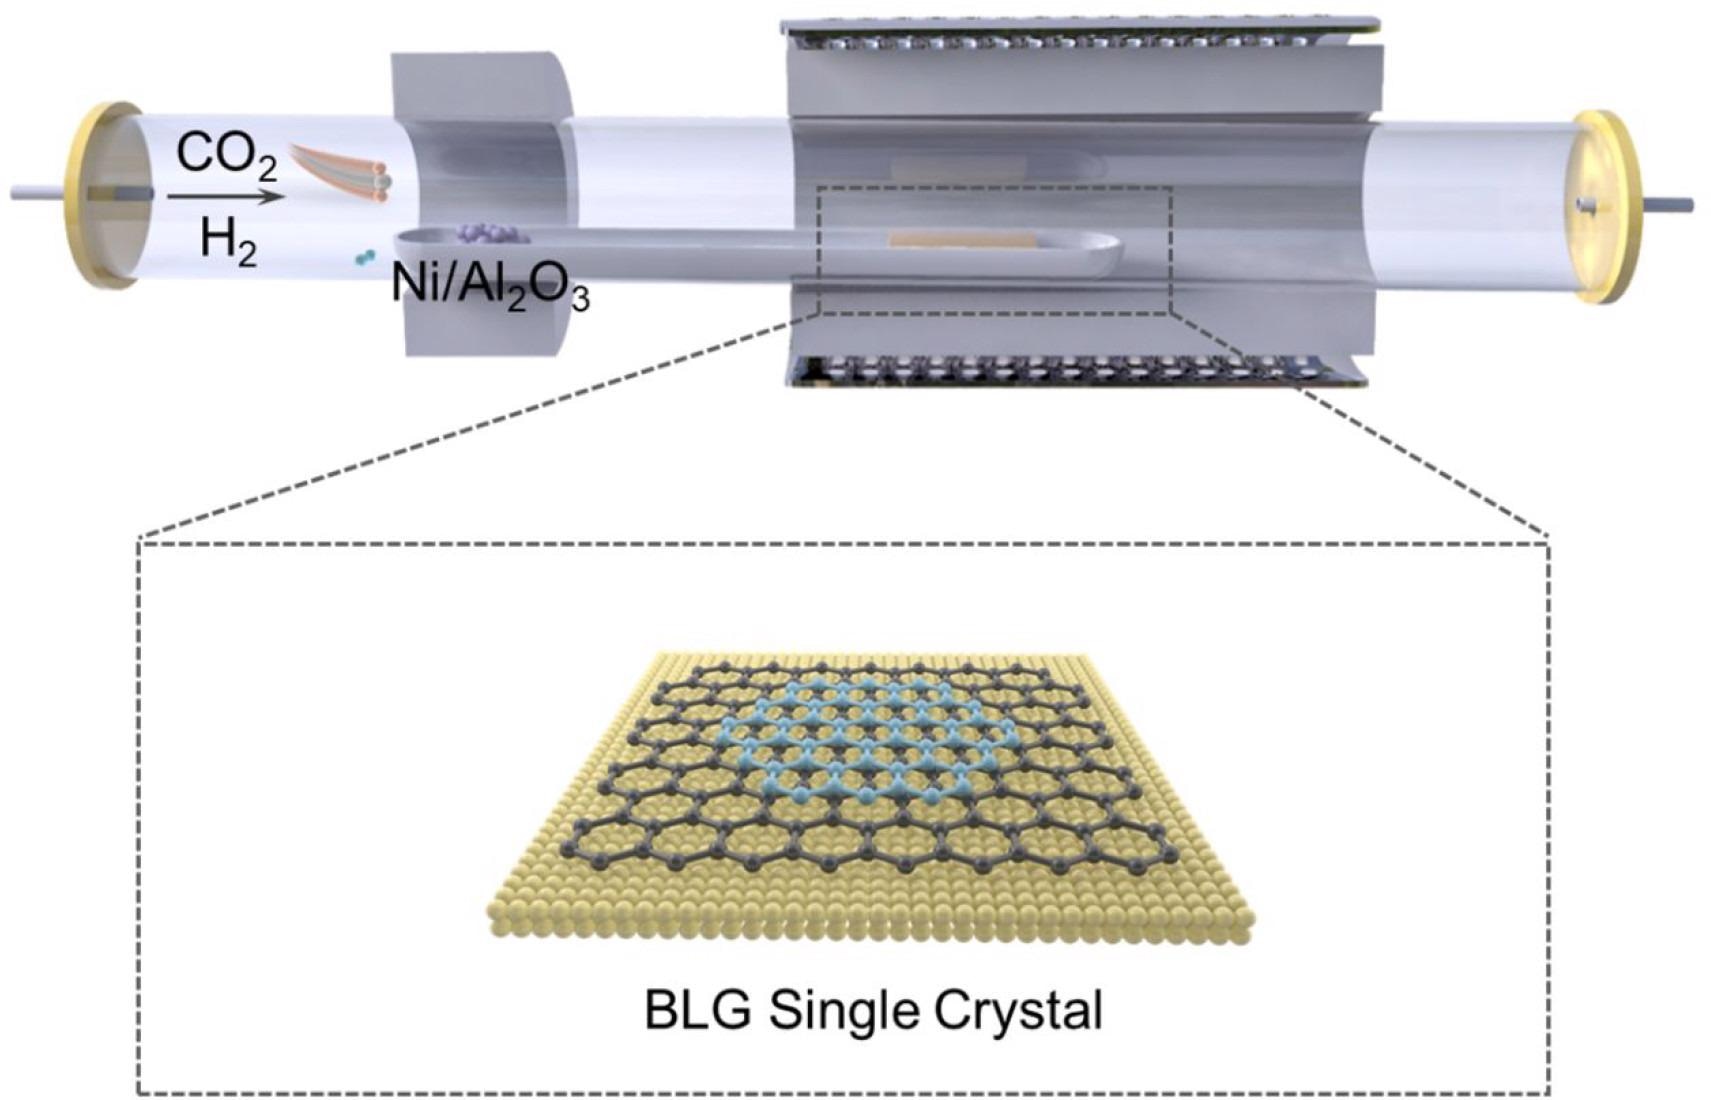 Schematic illustration of the BLG single crystal growth process.